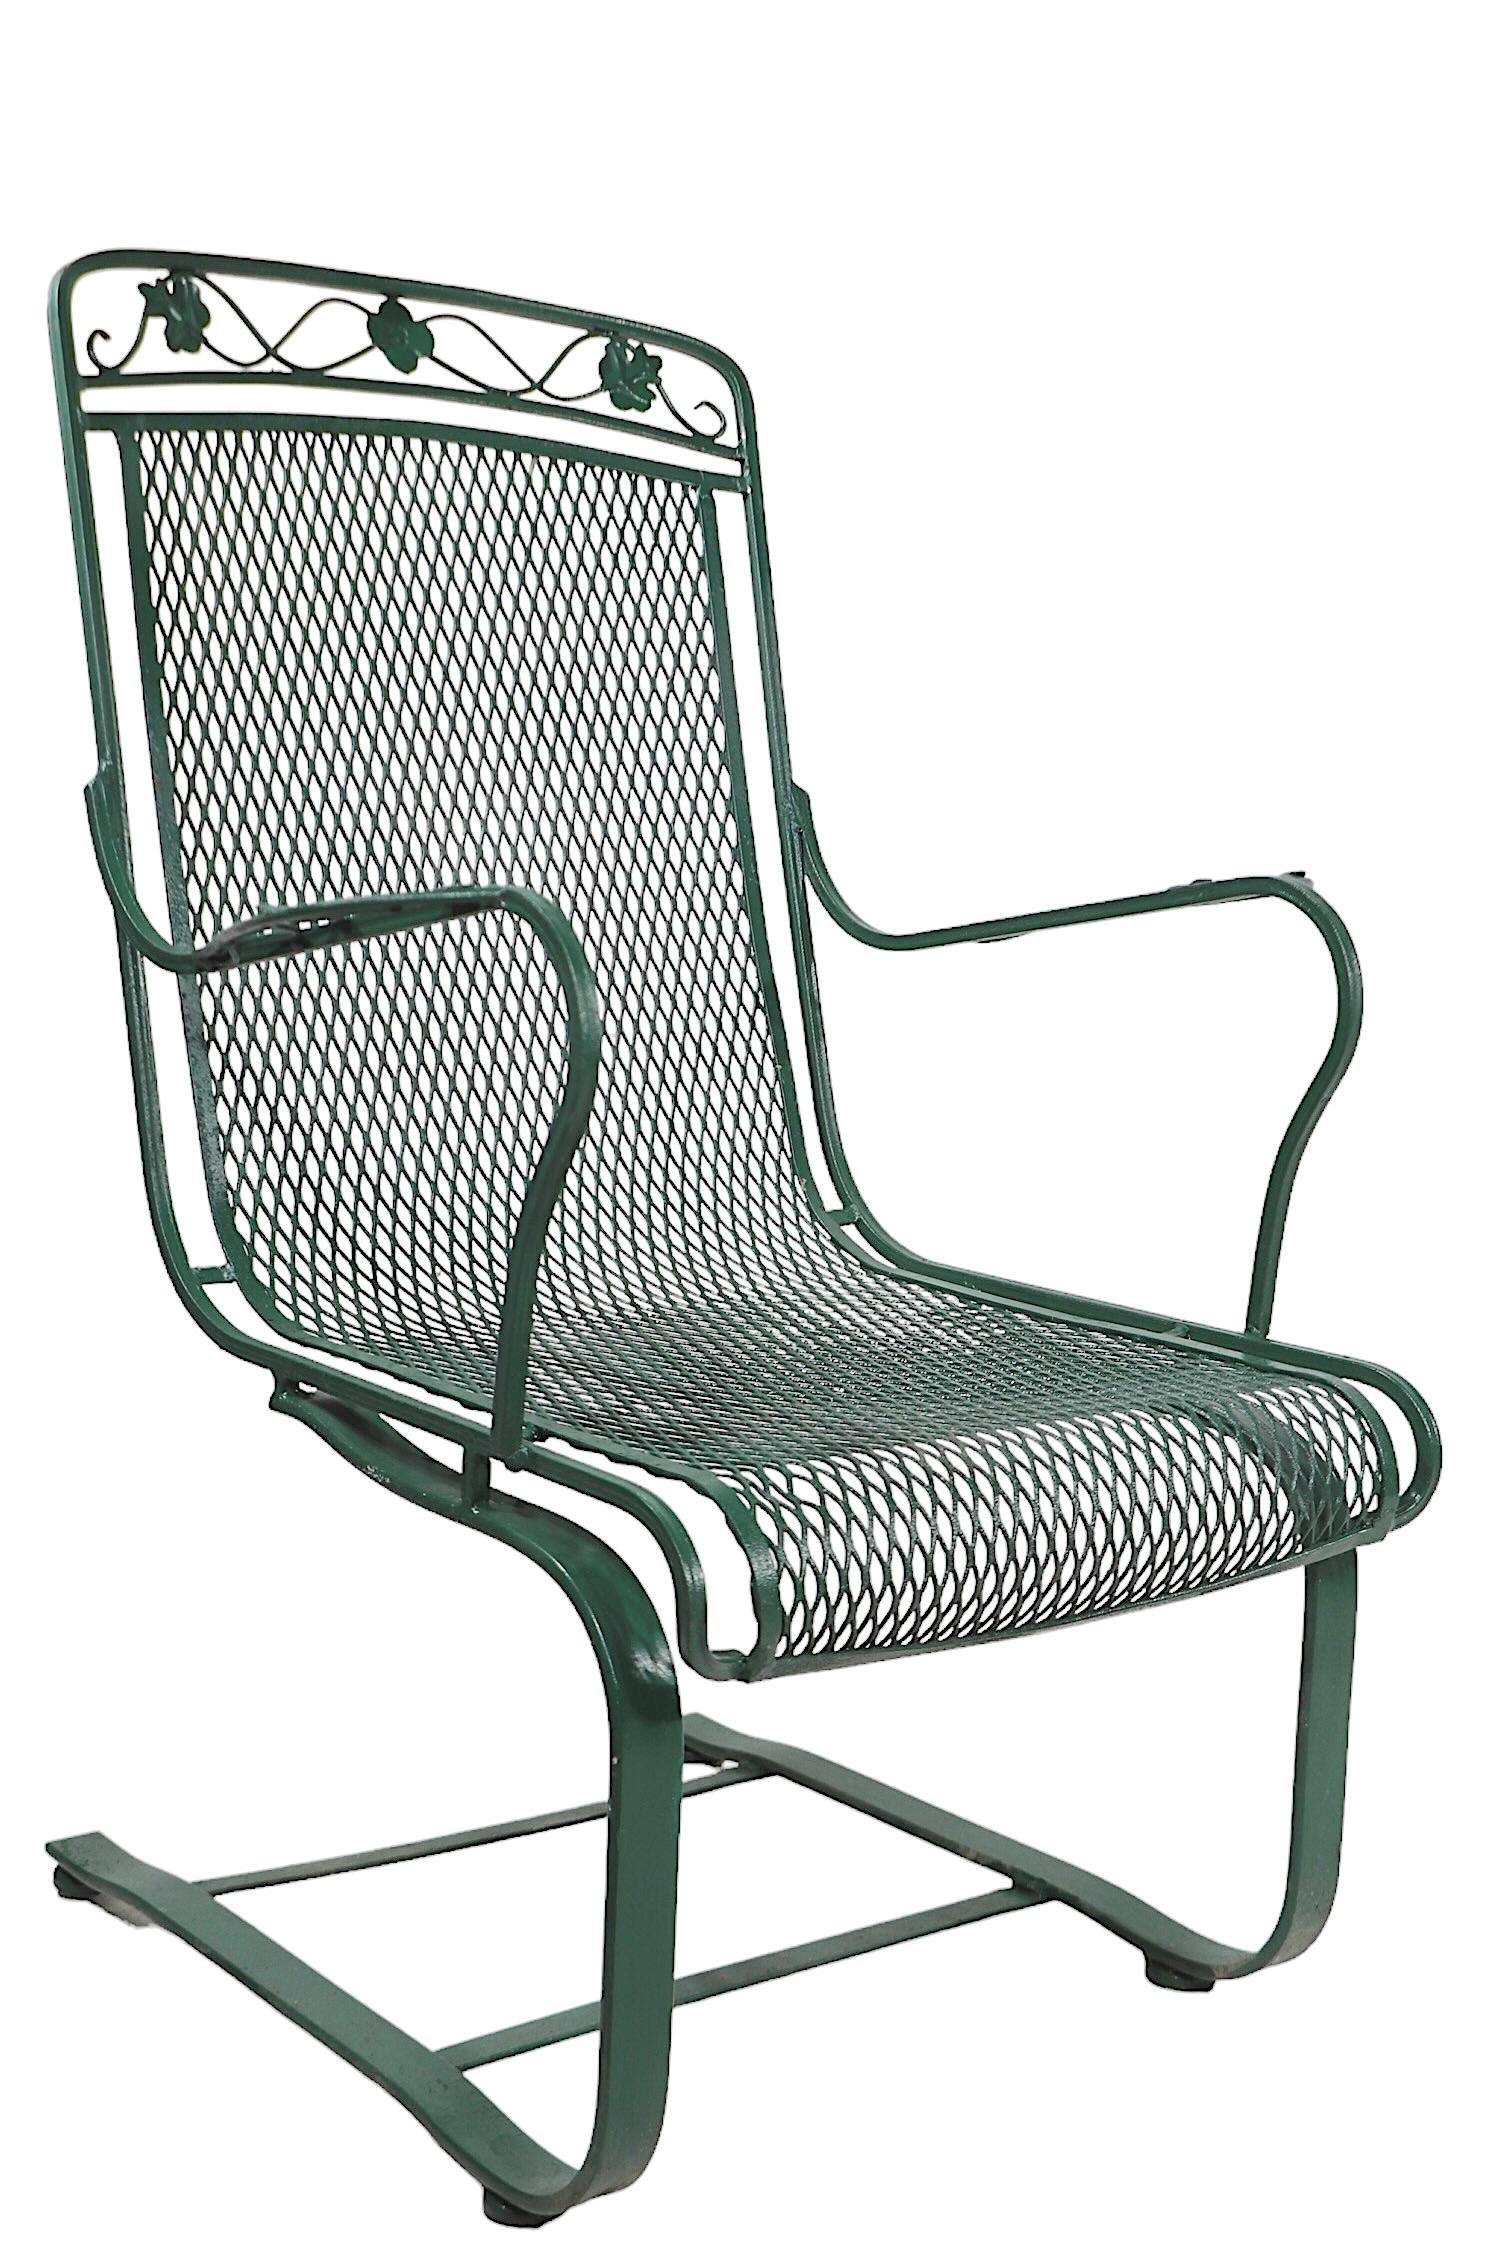 Hollywood Regency Pr. Cantilevered  Meadowcraft Dogwood Wrought Iron Lounge Chairs  For Sale